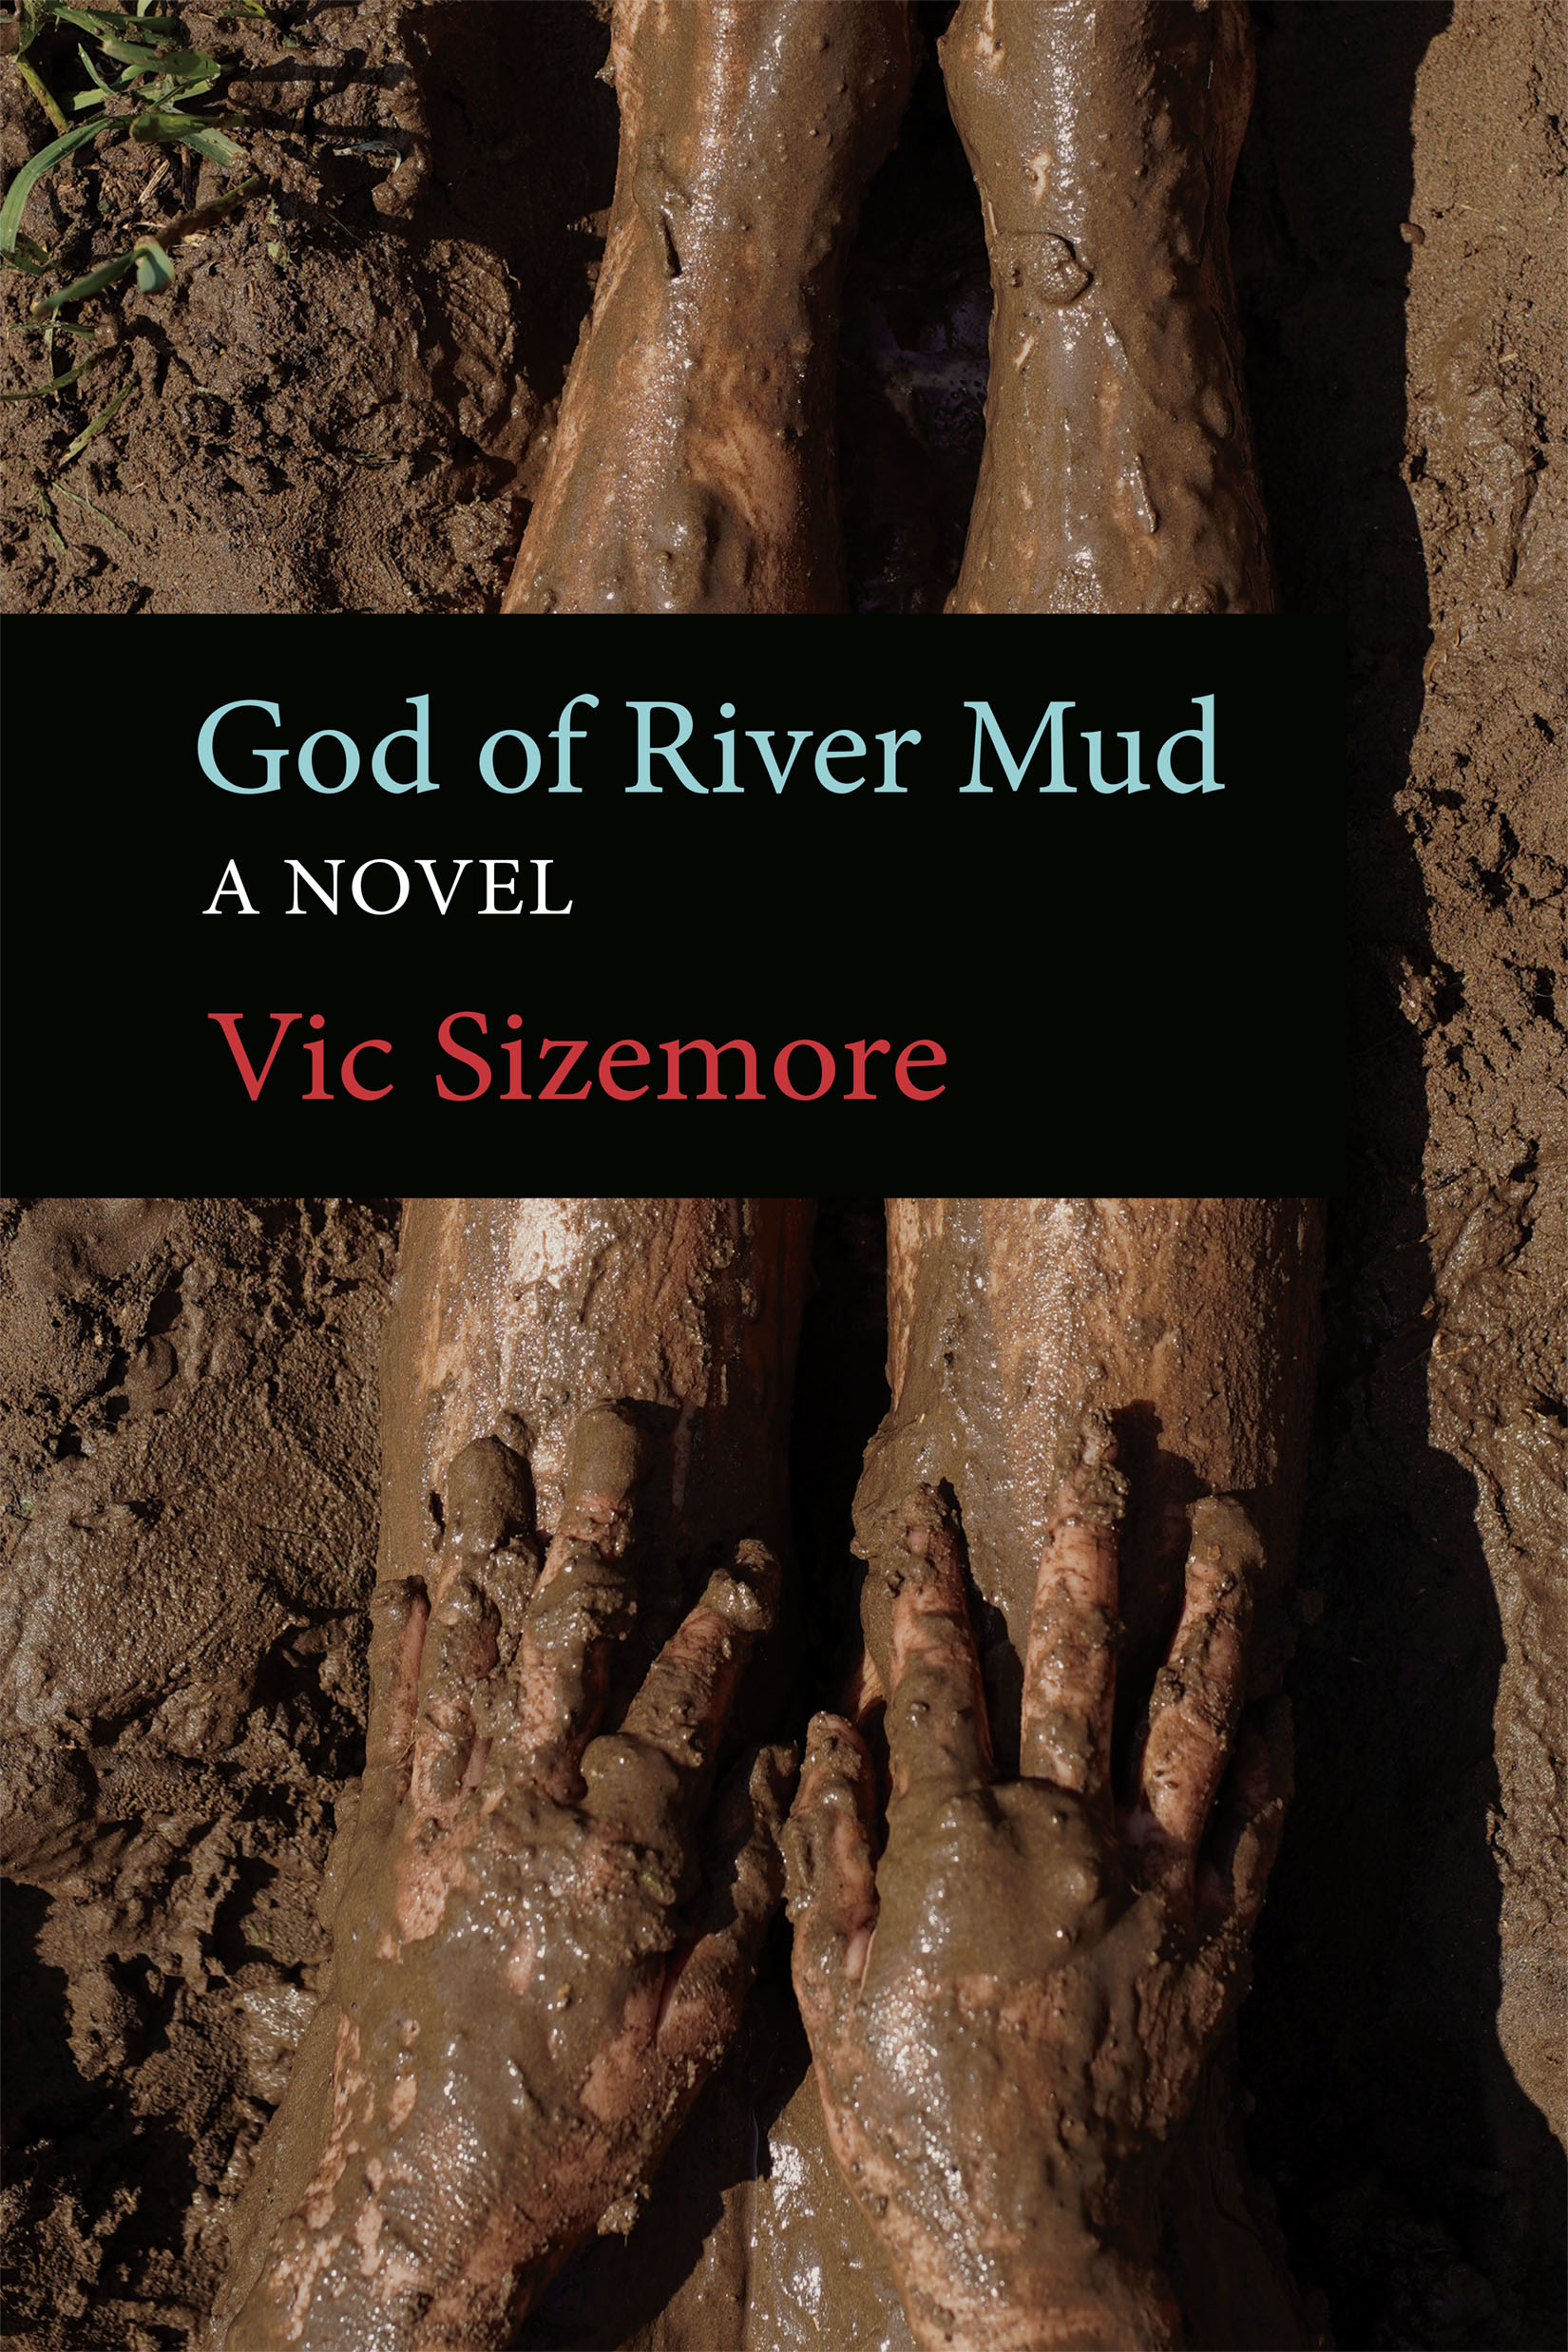 image of a child's legs outstretched sitting in mud and covered in mud; a black box contains the title God of River Mud: A Novel by Vic Sizemore